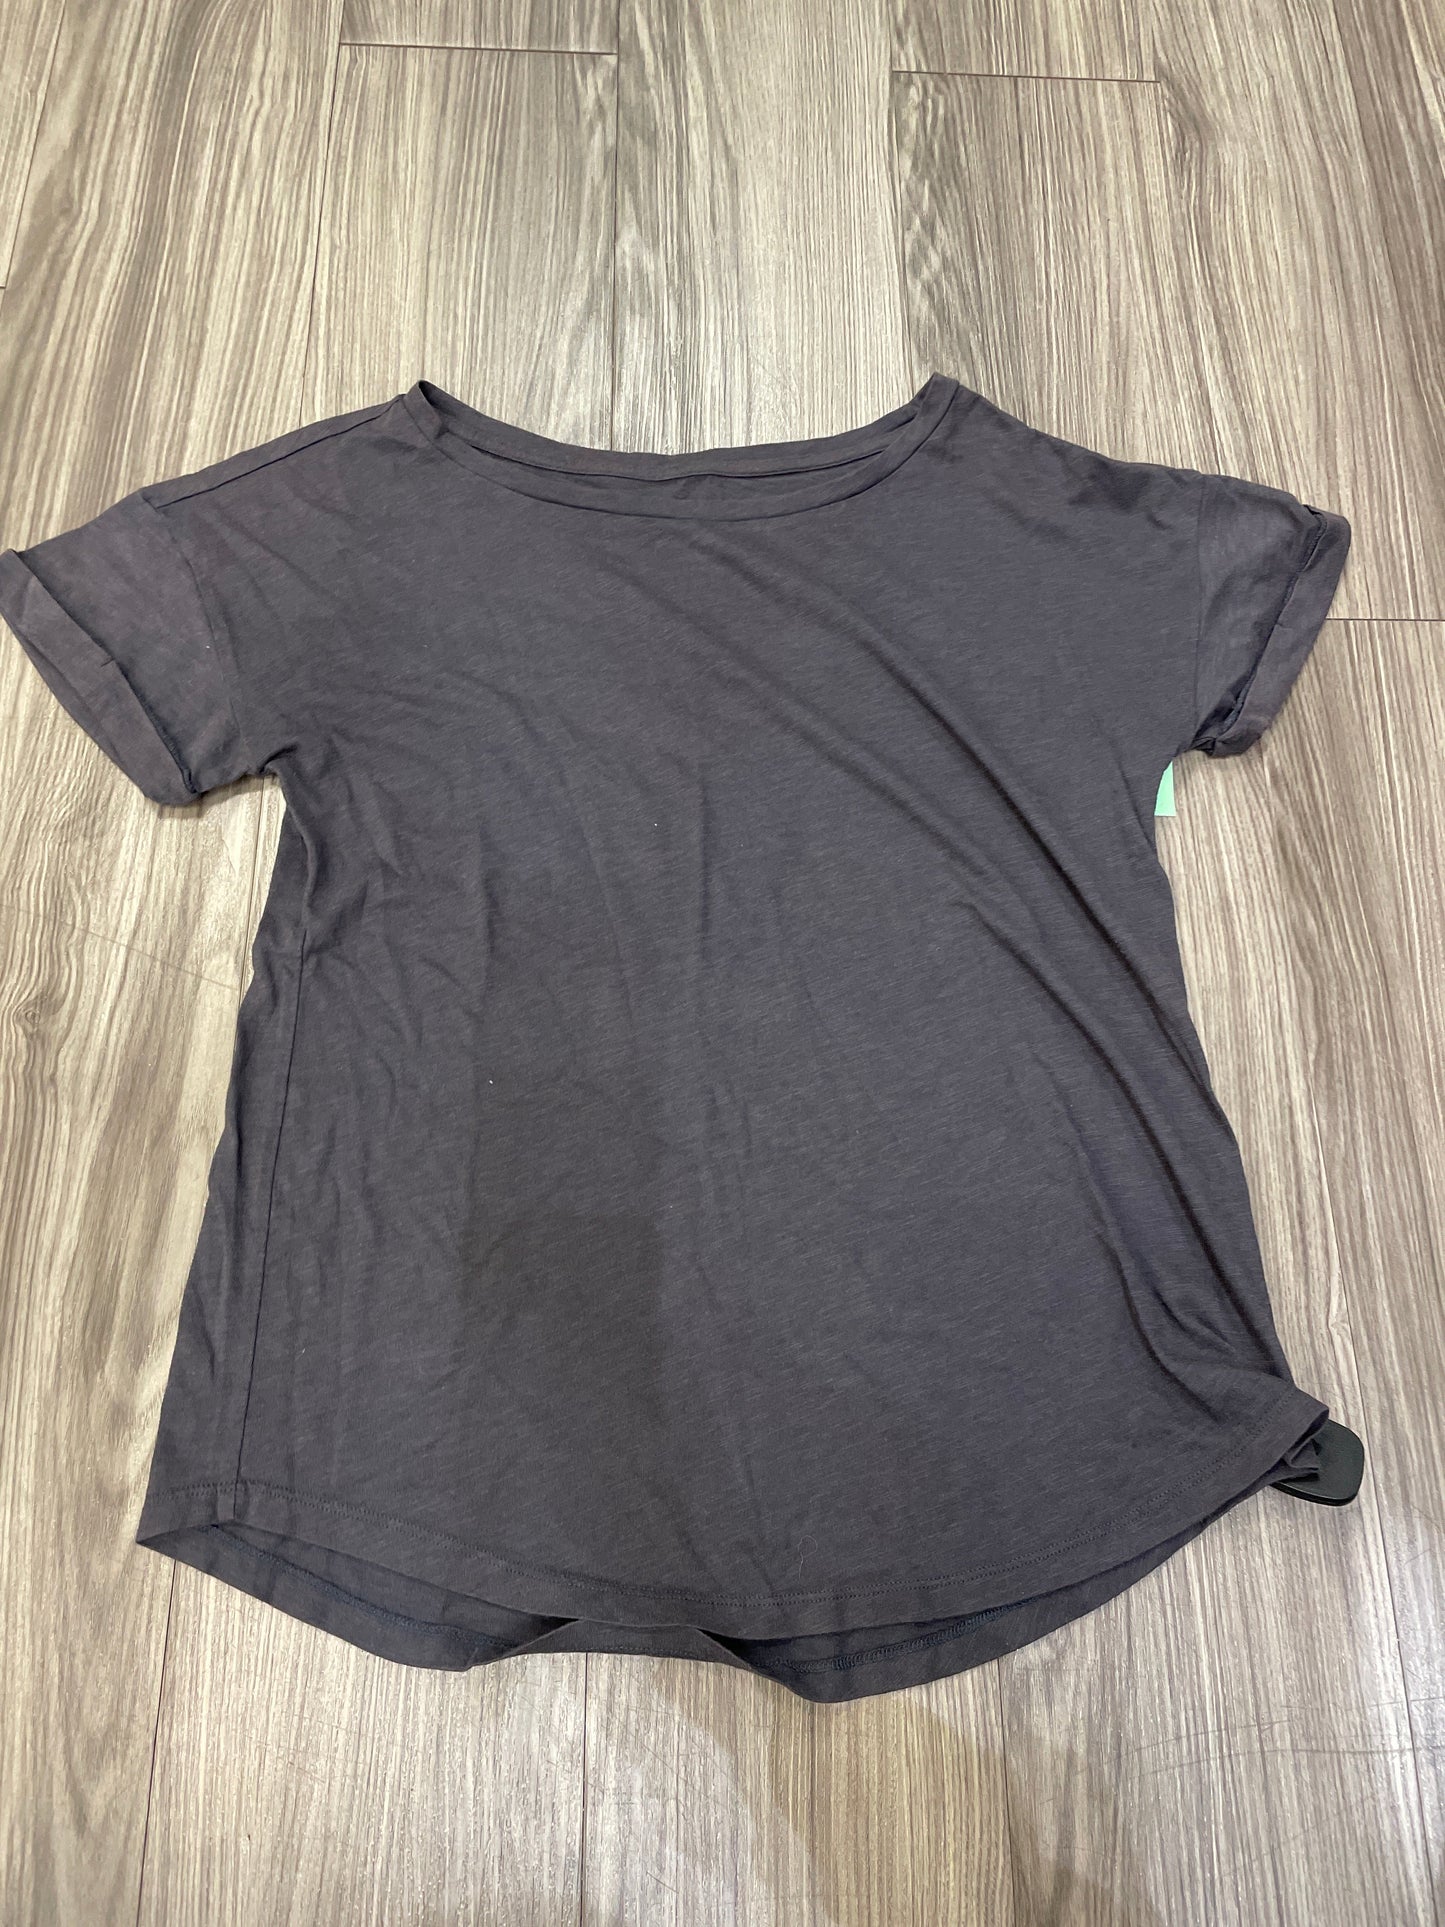 Grey Top Long Sleeve Maurices, Size L